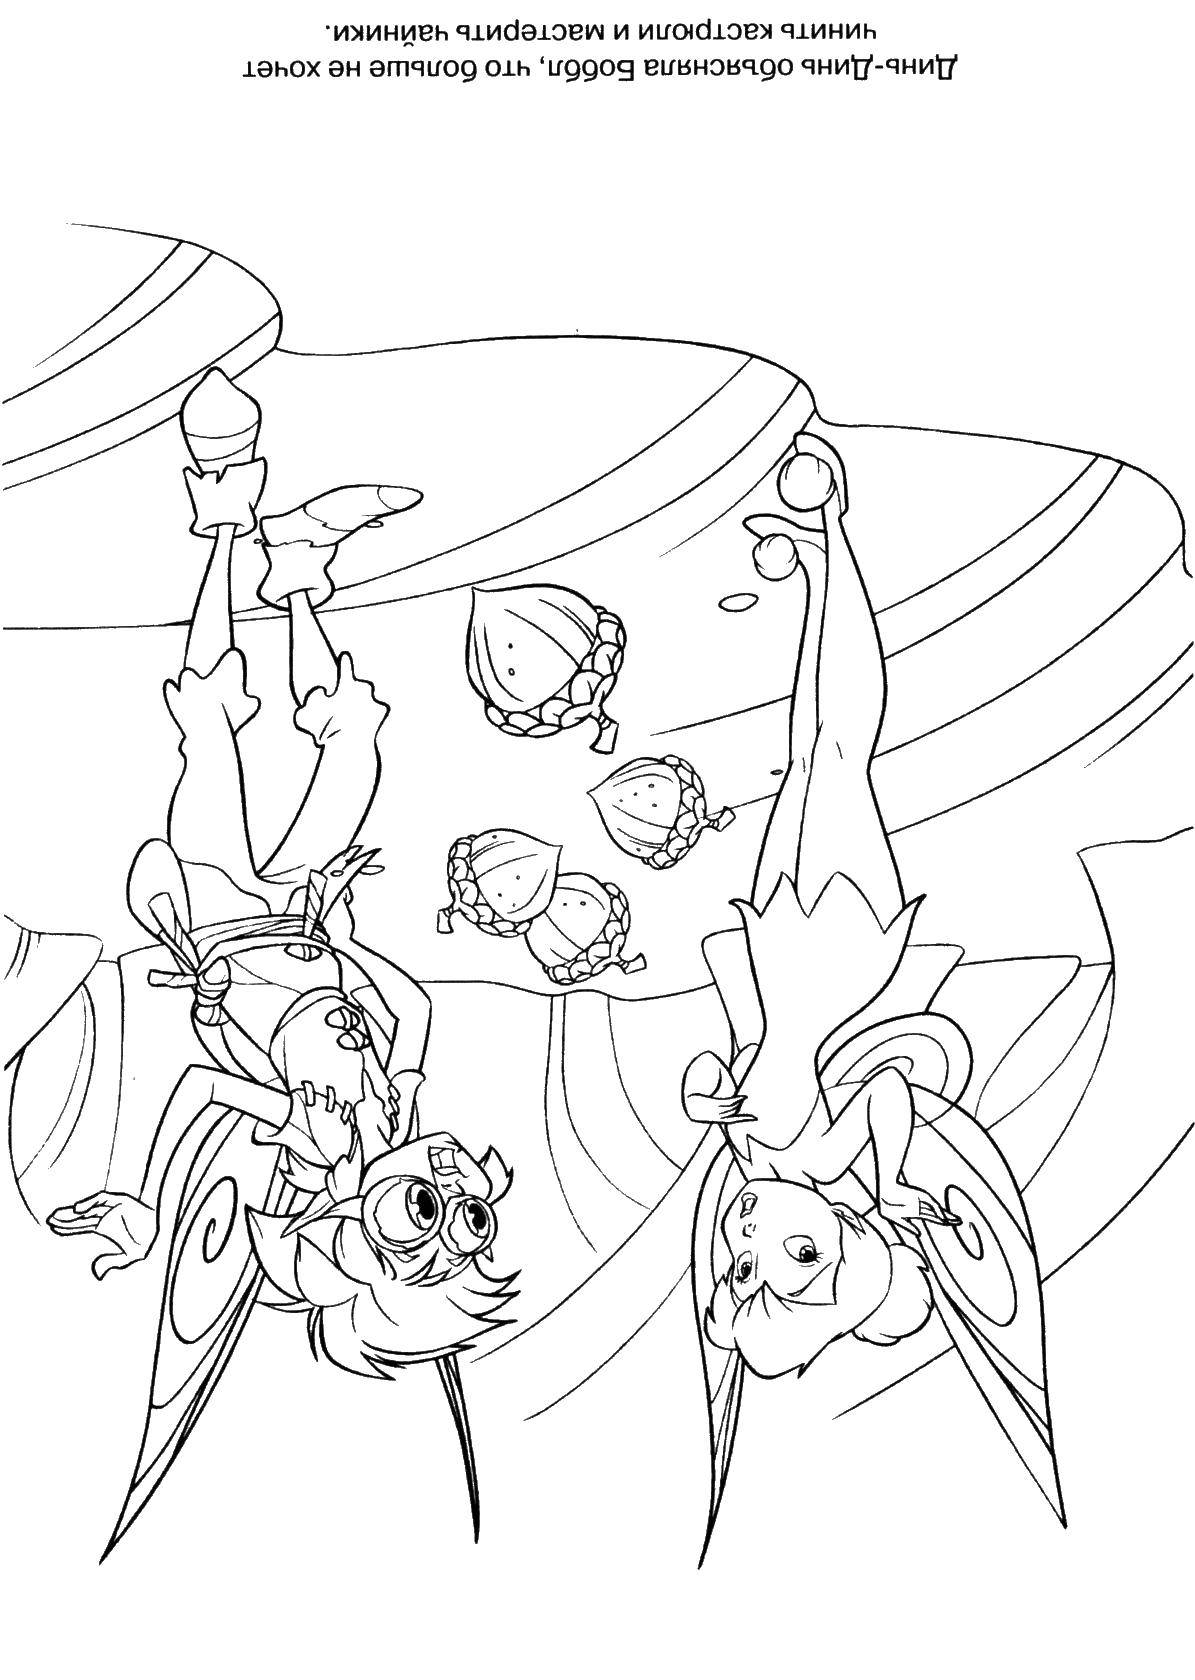 Coloring Tinker bell and bobble. Category fairies. Tags:  fairies Dingding, bobble.